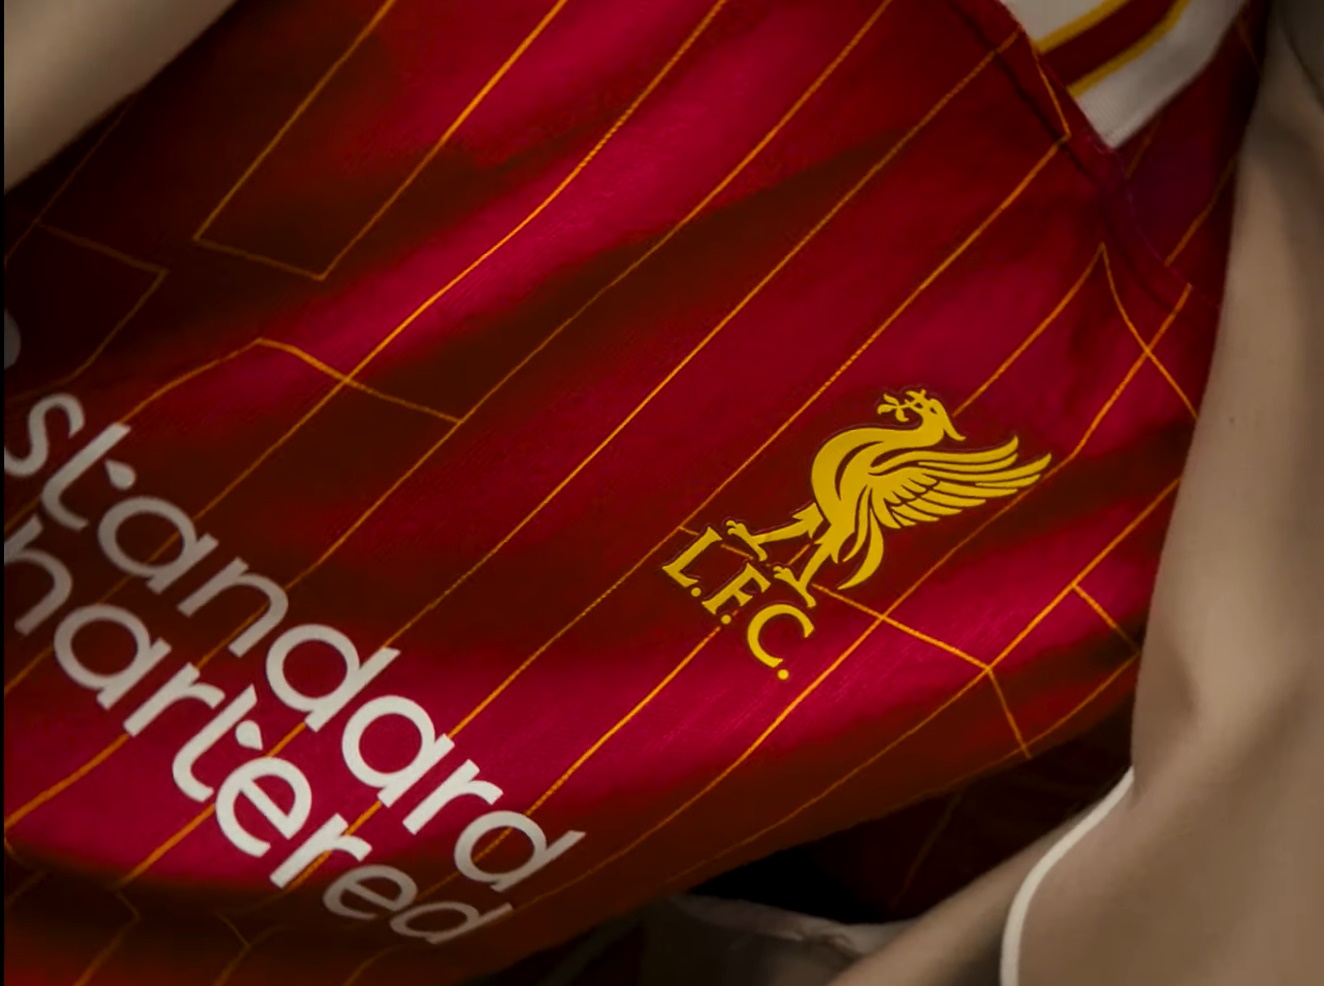 Liverpool fans will be fuming over what Nike has done as Reds’ new home kit is unveiled